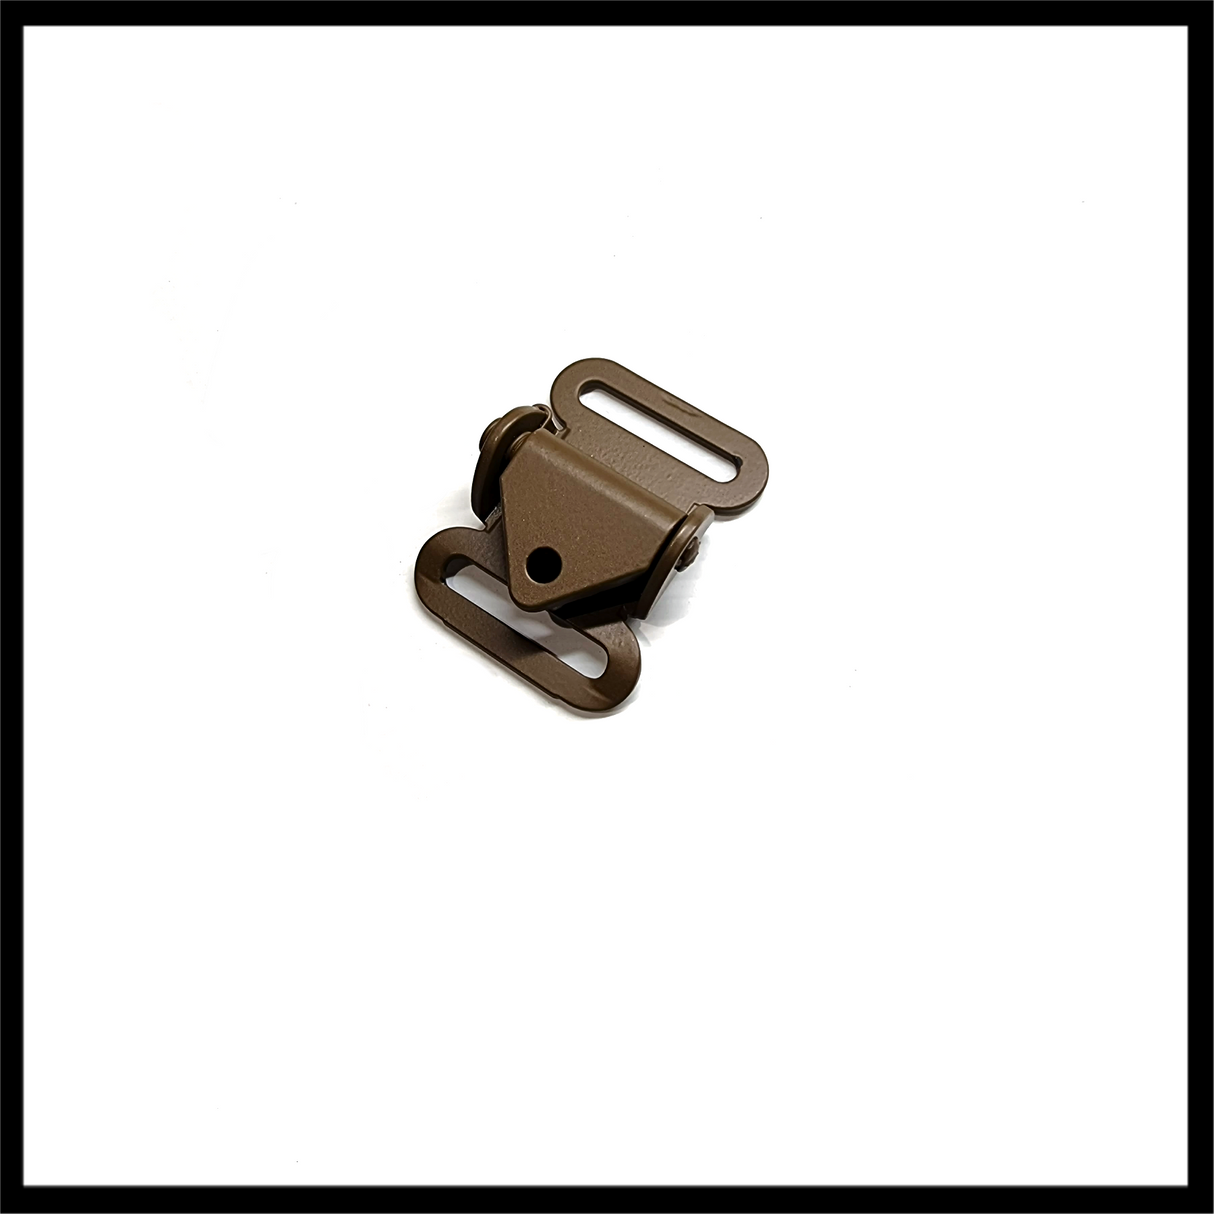 ITW Mil-Spec 25mm Cam Buckle Quick-Release Coyote Brown